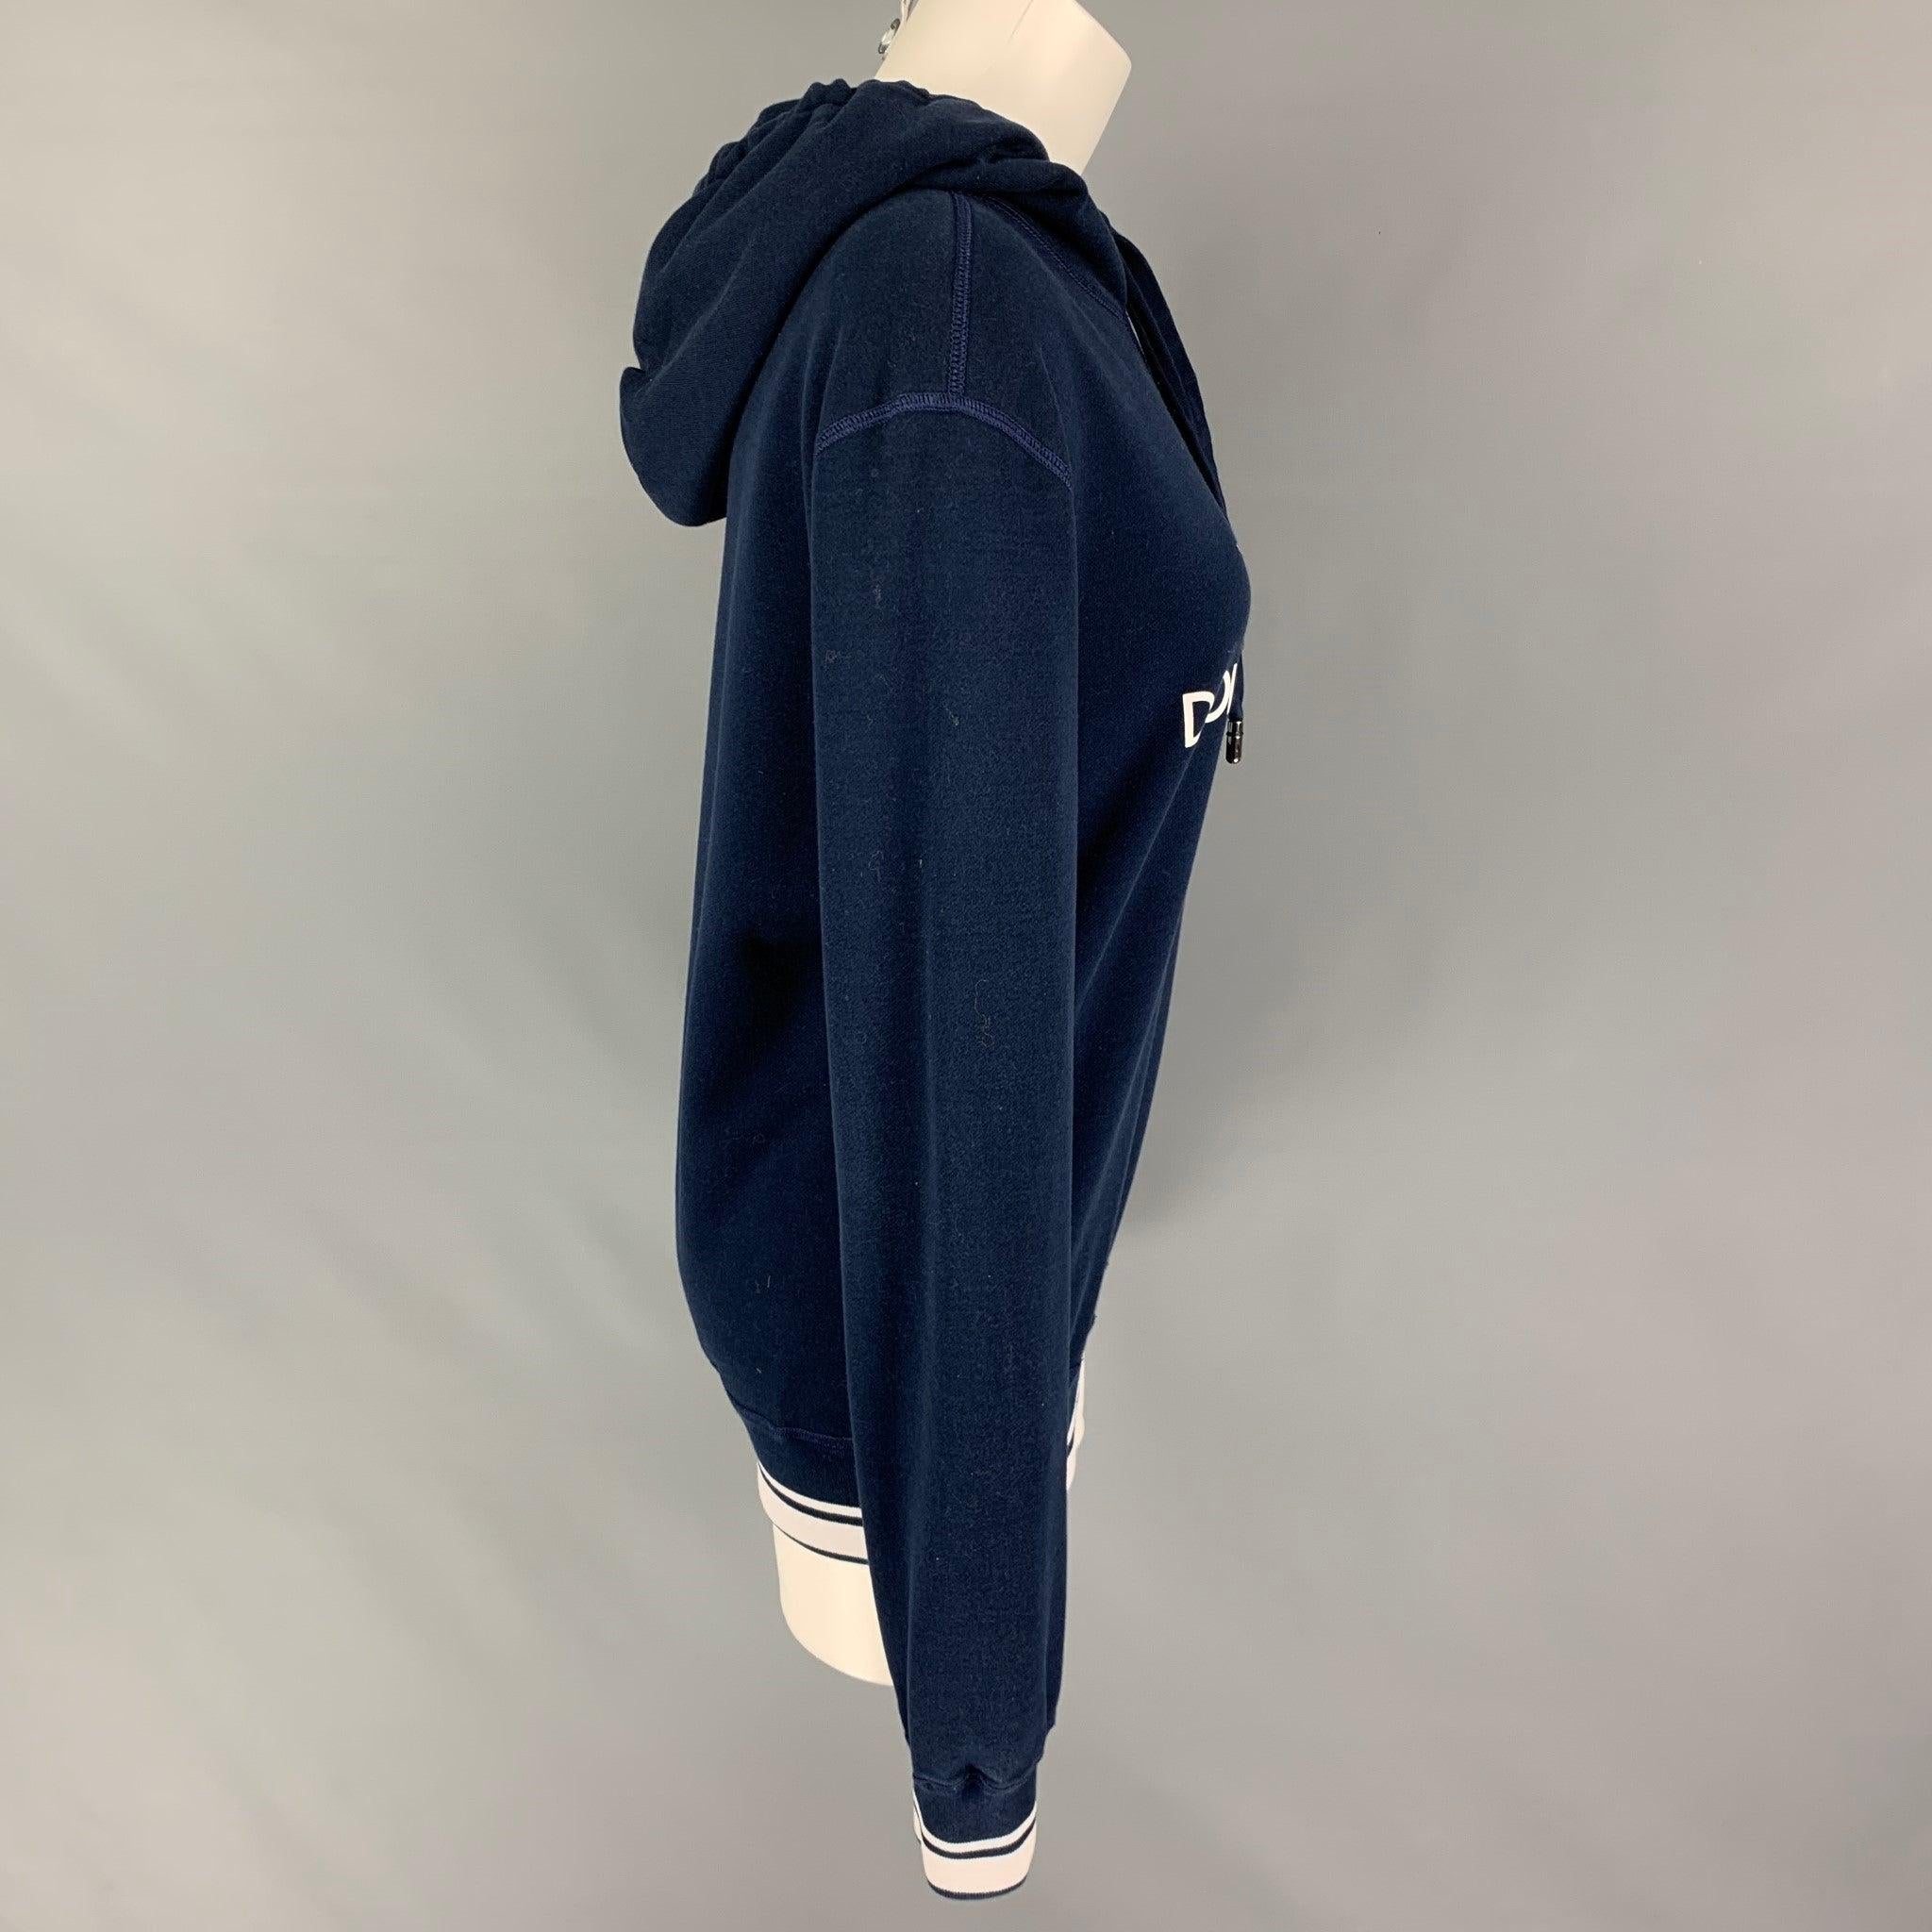 DOLCE & GABBANA sweatshirt comes in a navy & white cotton featuring a front logo design, hooded, ribbed hem, and a drawstring. Made in Italy.
Very Good
Pre-Owned Condition. 

Marked:   44 

Measurements: 
 
Shoulder: 18.5 inches  Bust: 39 inches 